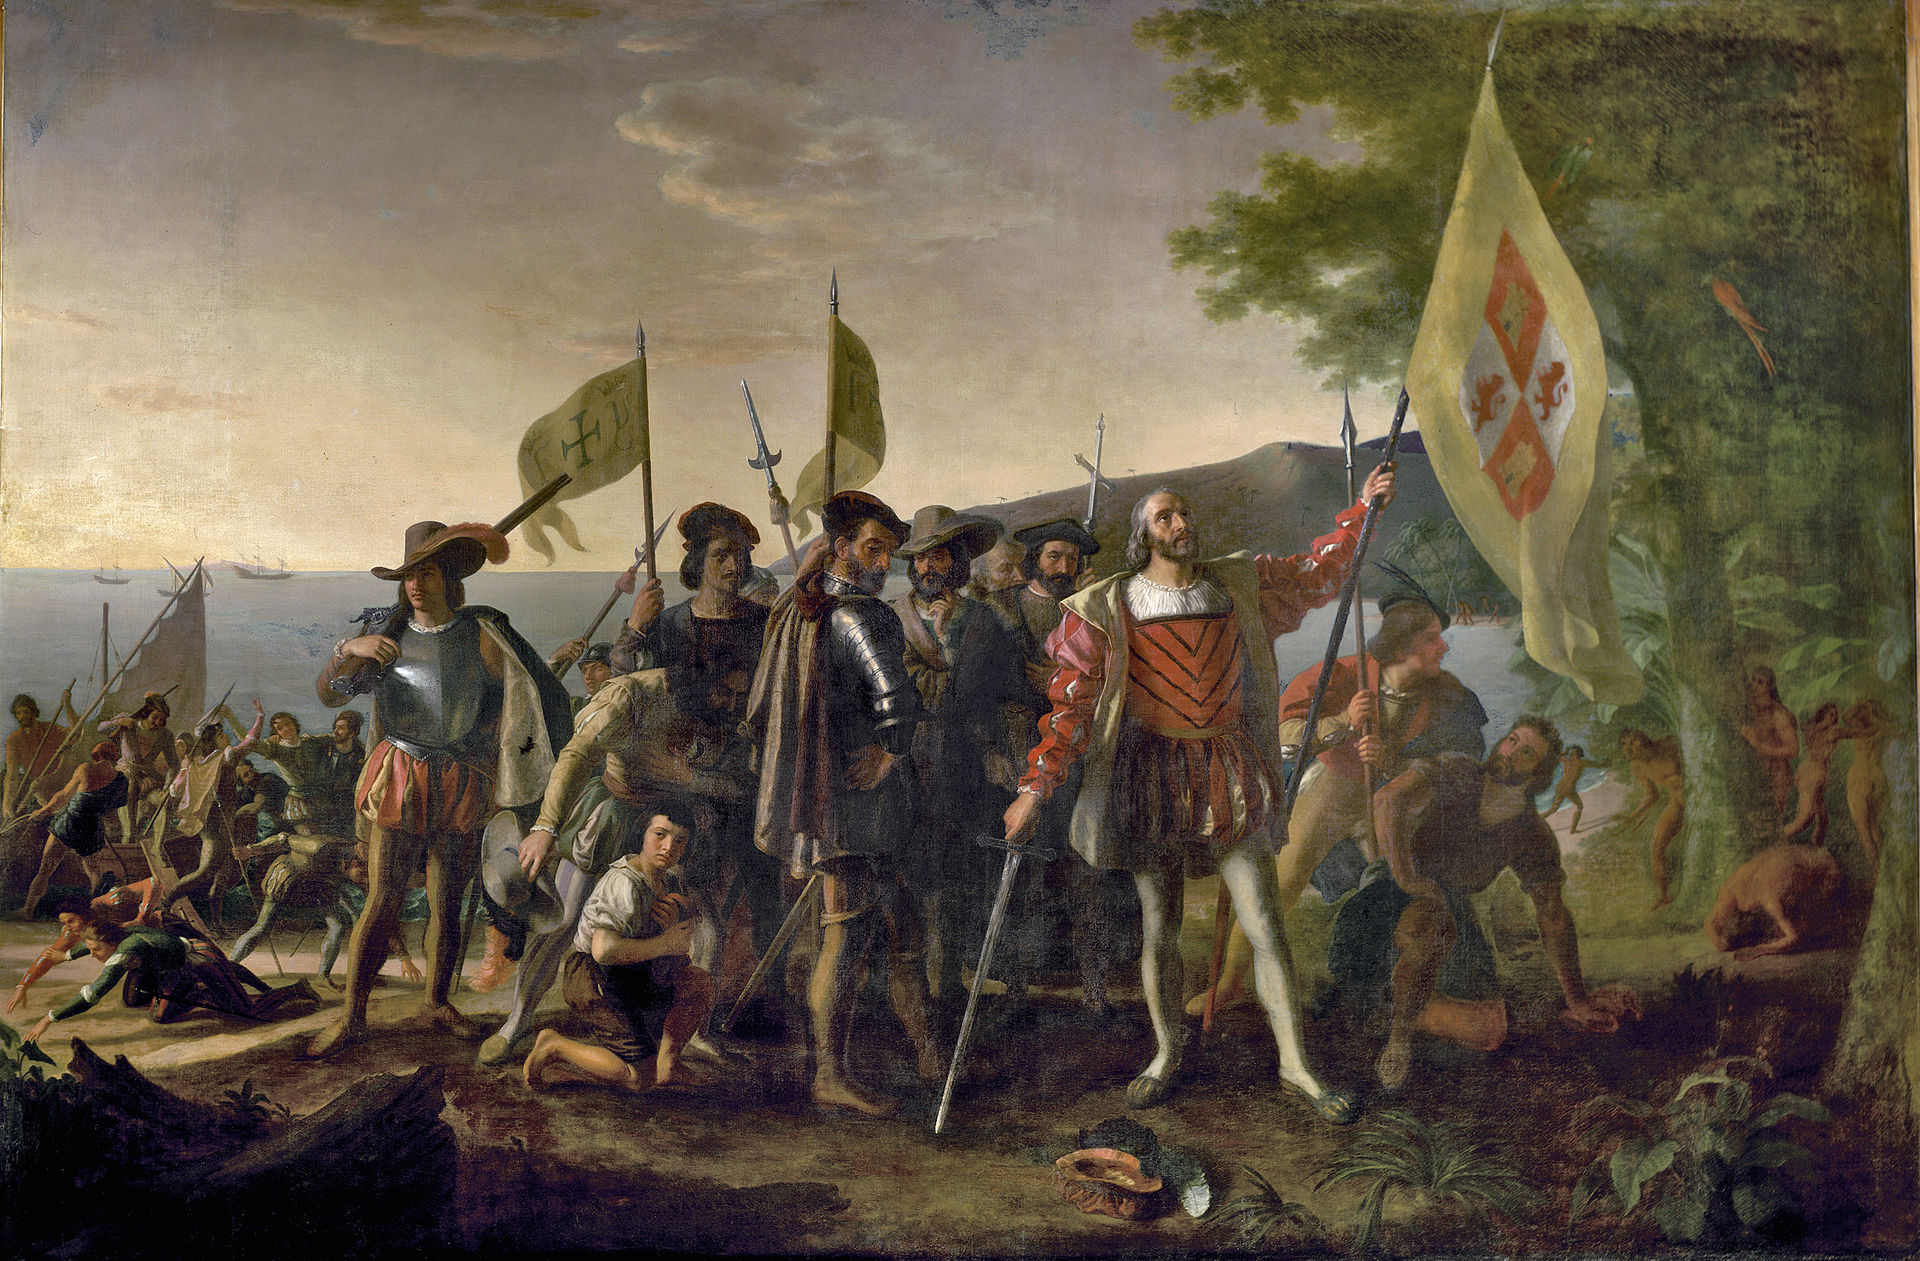 Celebrating Genocide – Christopher Columbus' Conquest of America - The Landing of Columbus